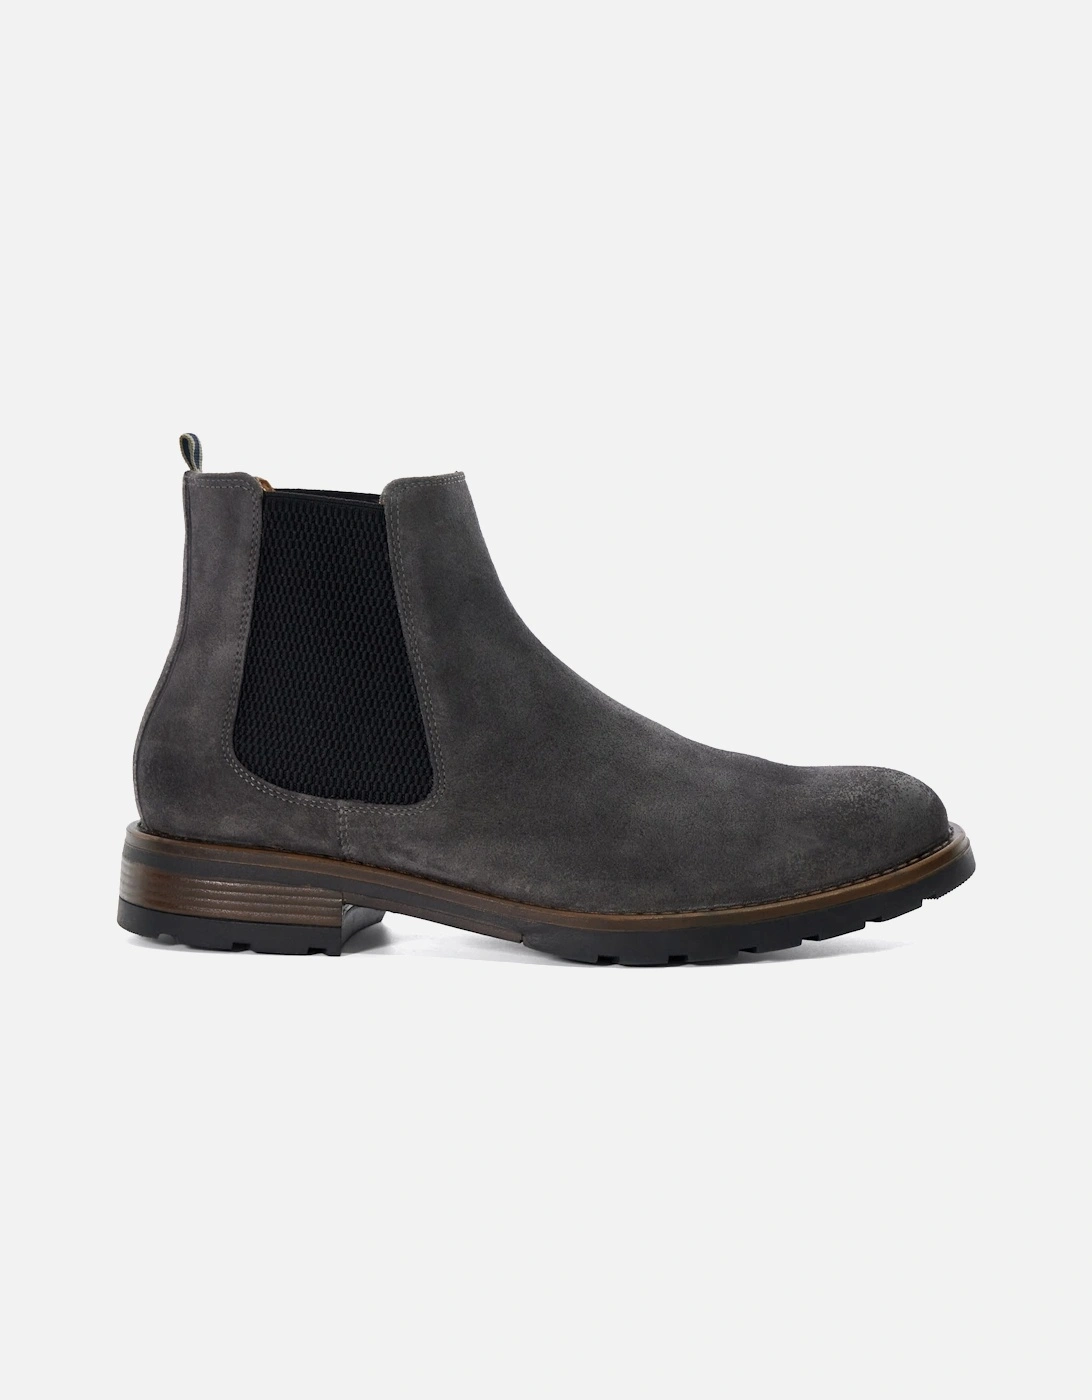 Mens Chelty - Brushed Suede Chelsea Boots